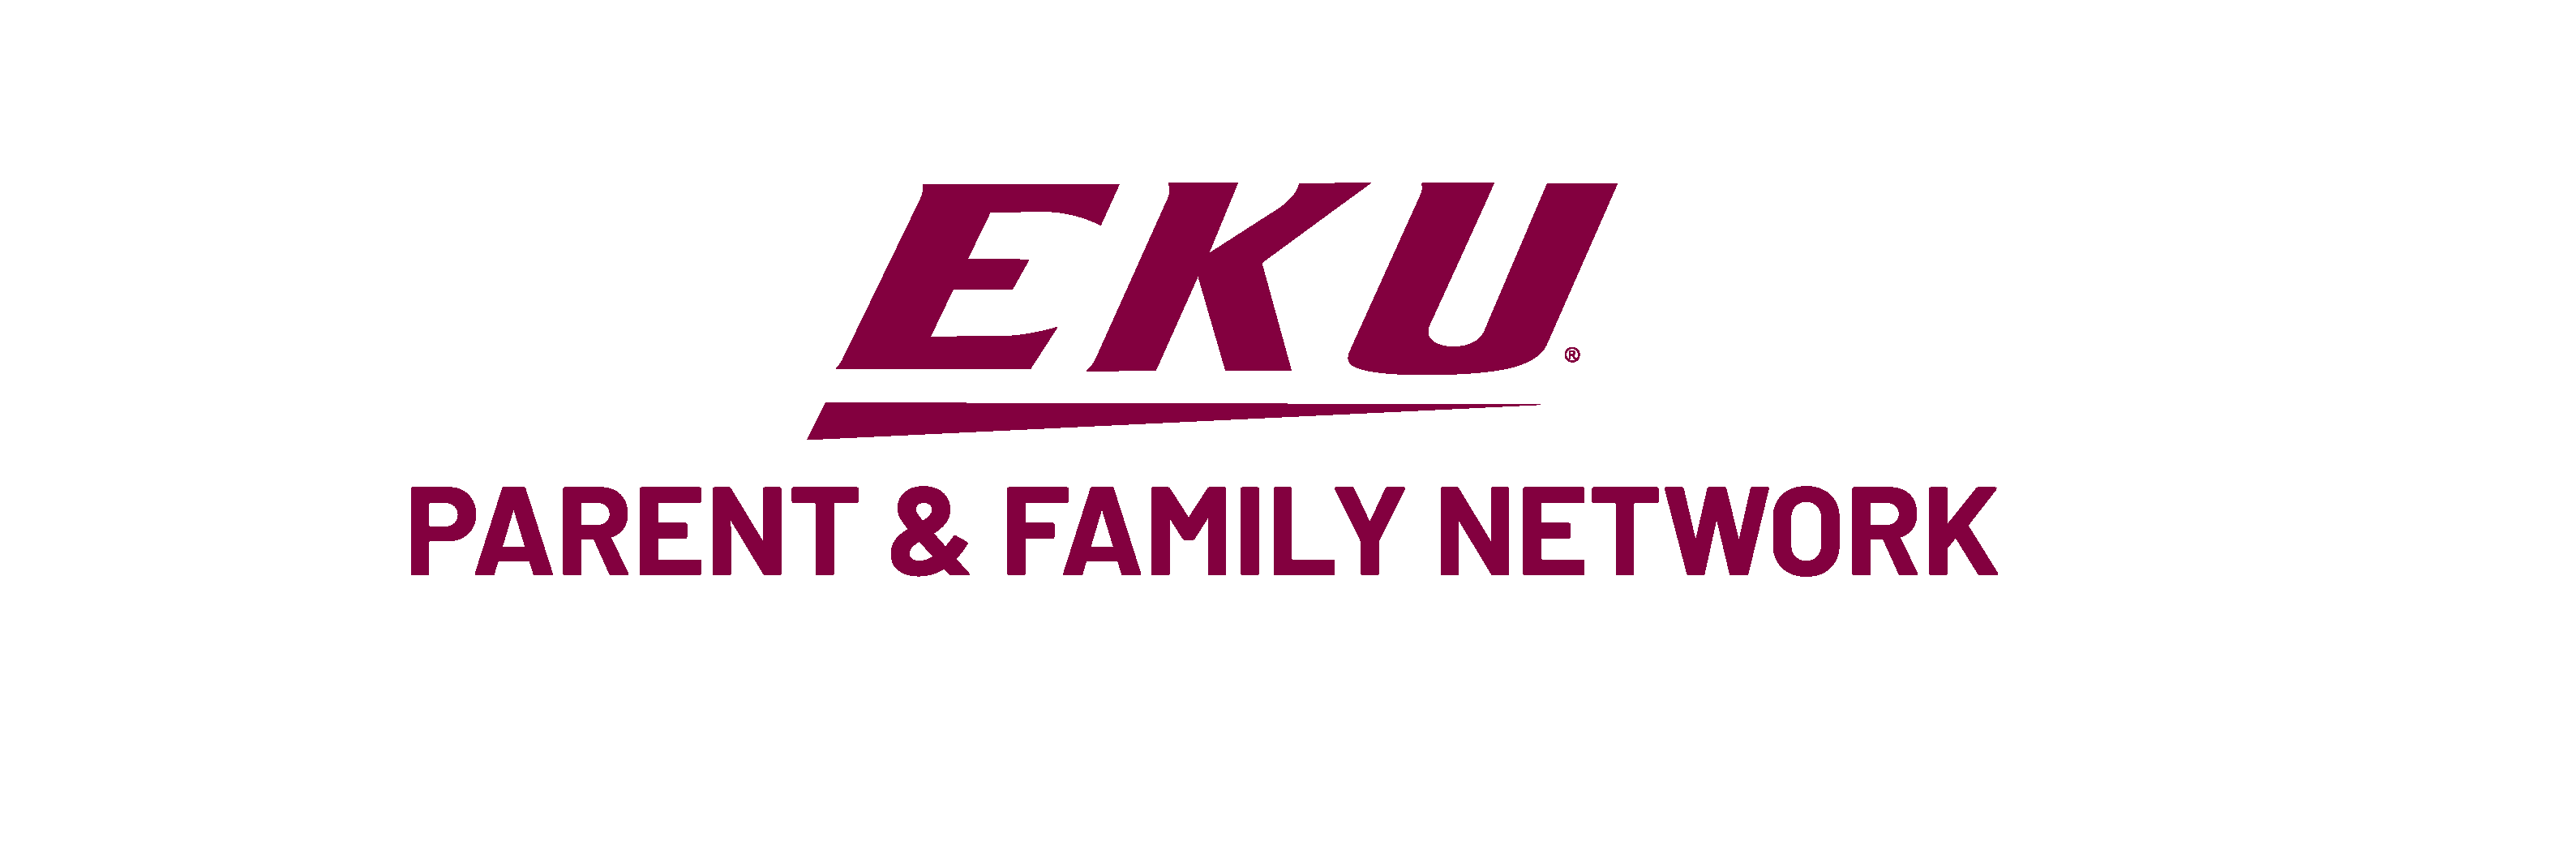 Parent and Family Network logo